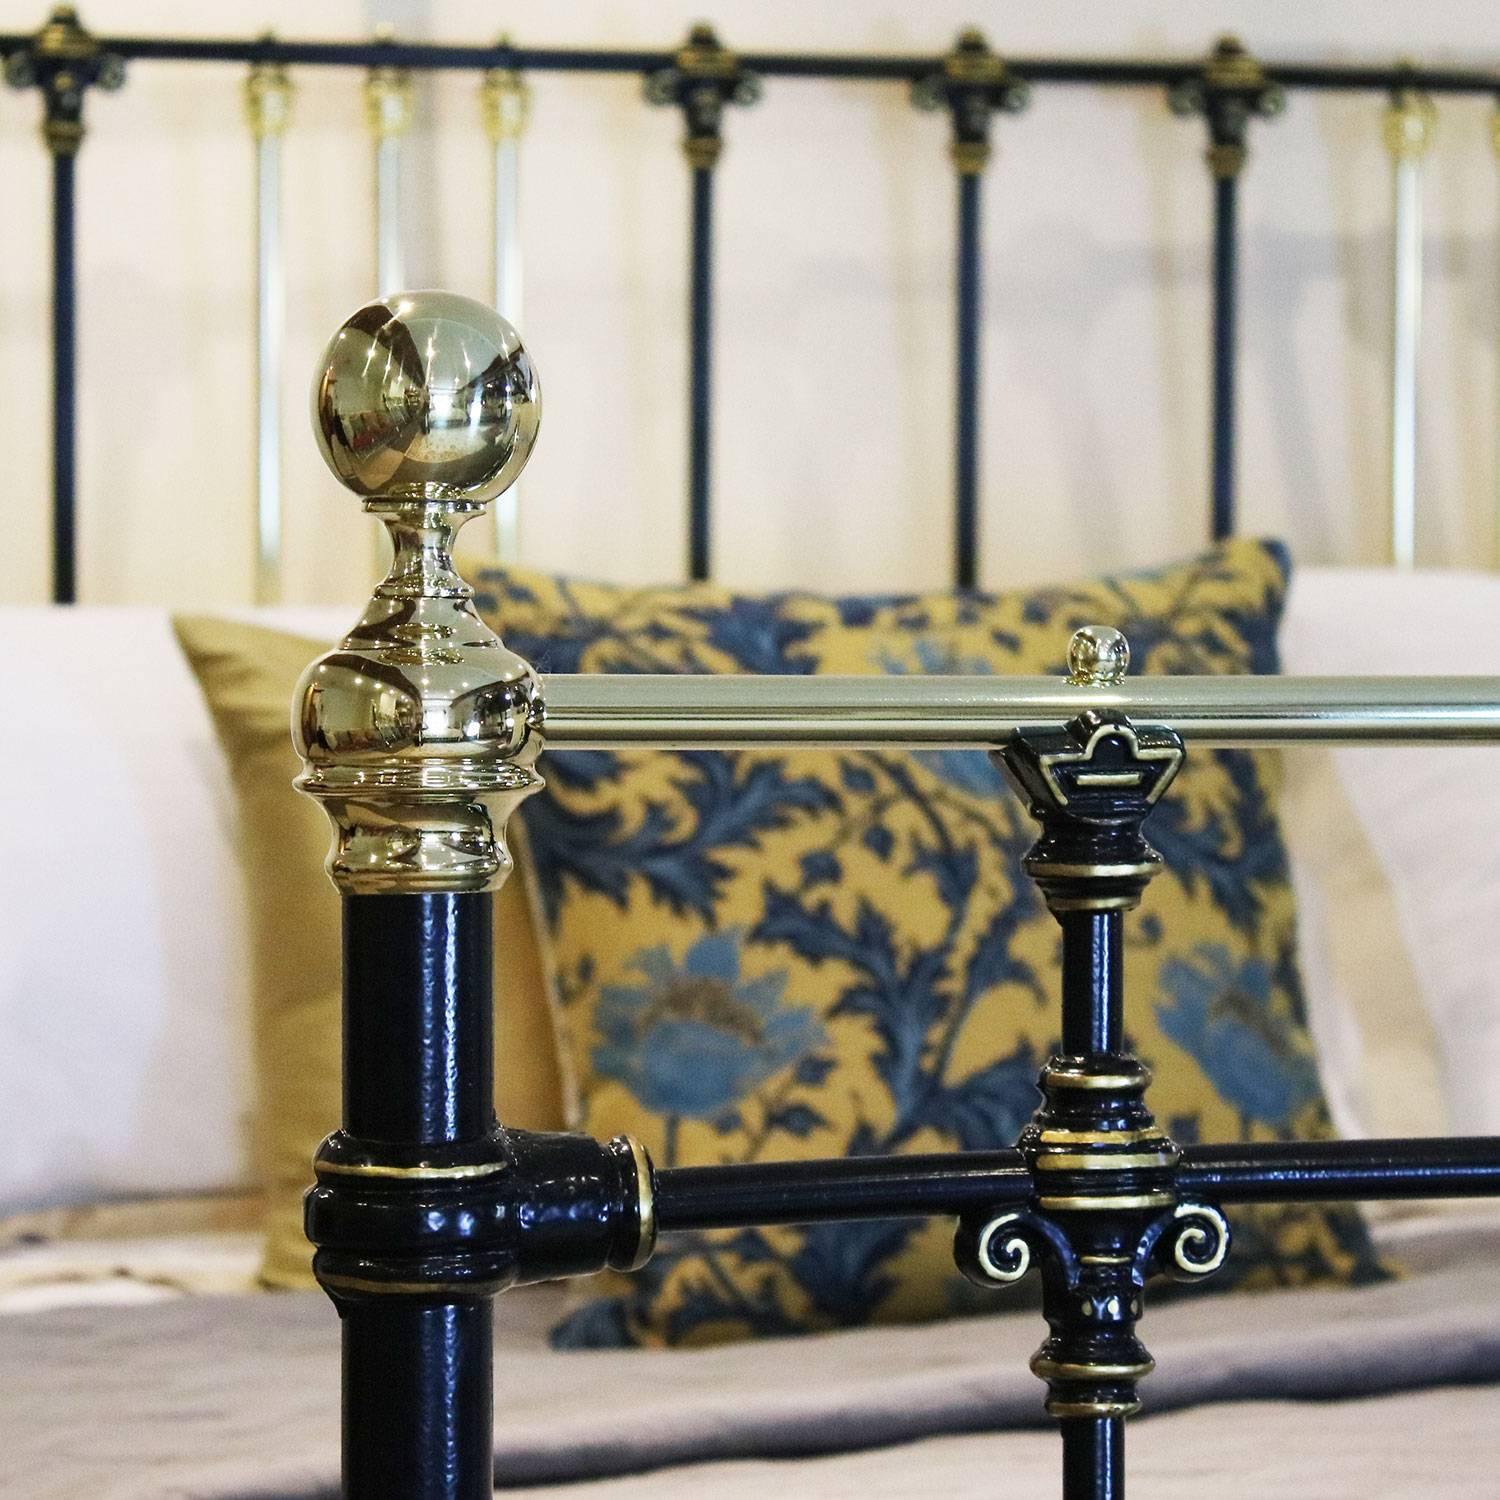 A handsome brass and iron bed adapted from an original Victorian frame with ornate castings that have been highlighted using the traditional technique of hand gold-lining.

This bed accepts a British Super kingsize or Californian kingsize (72